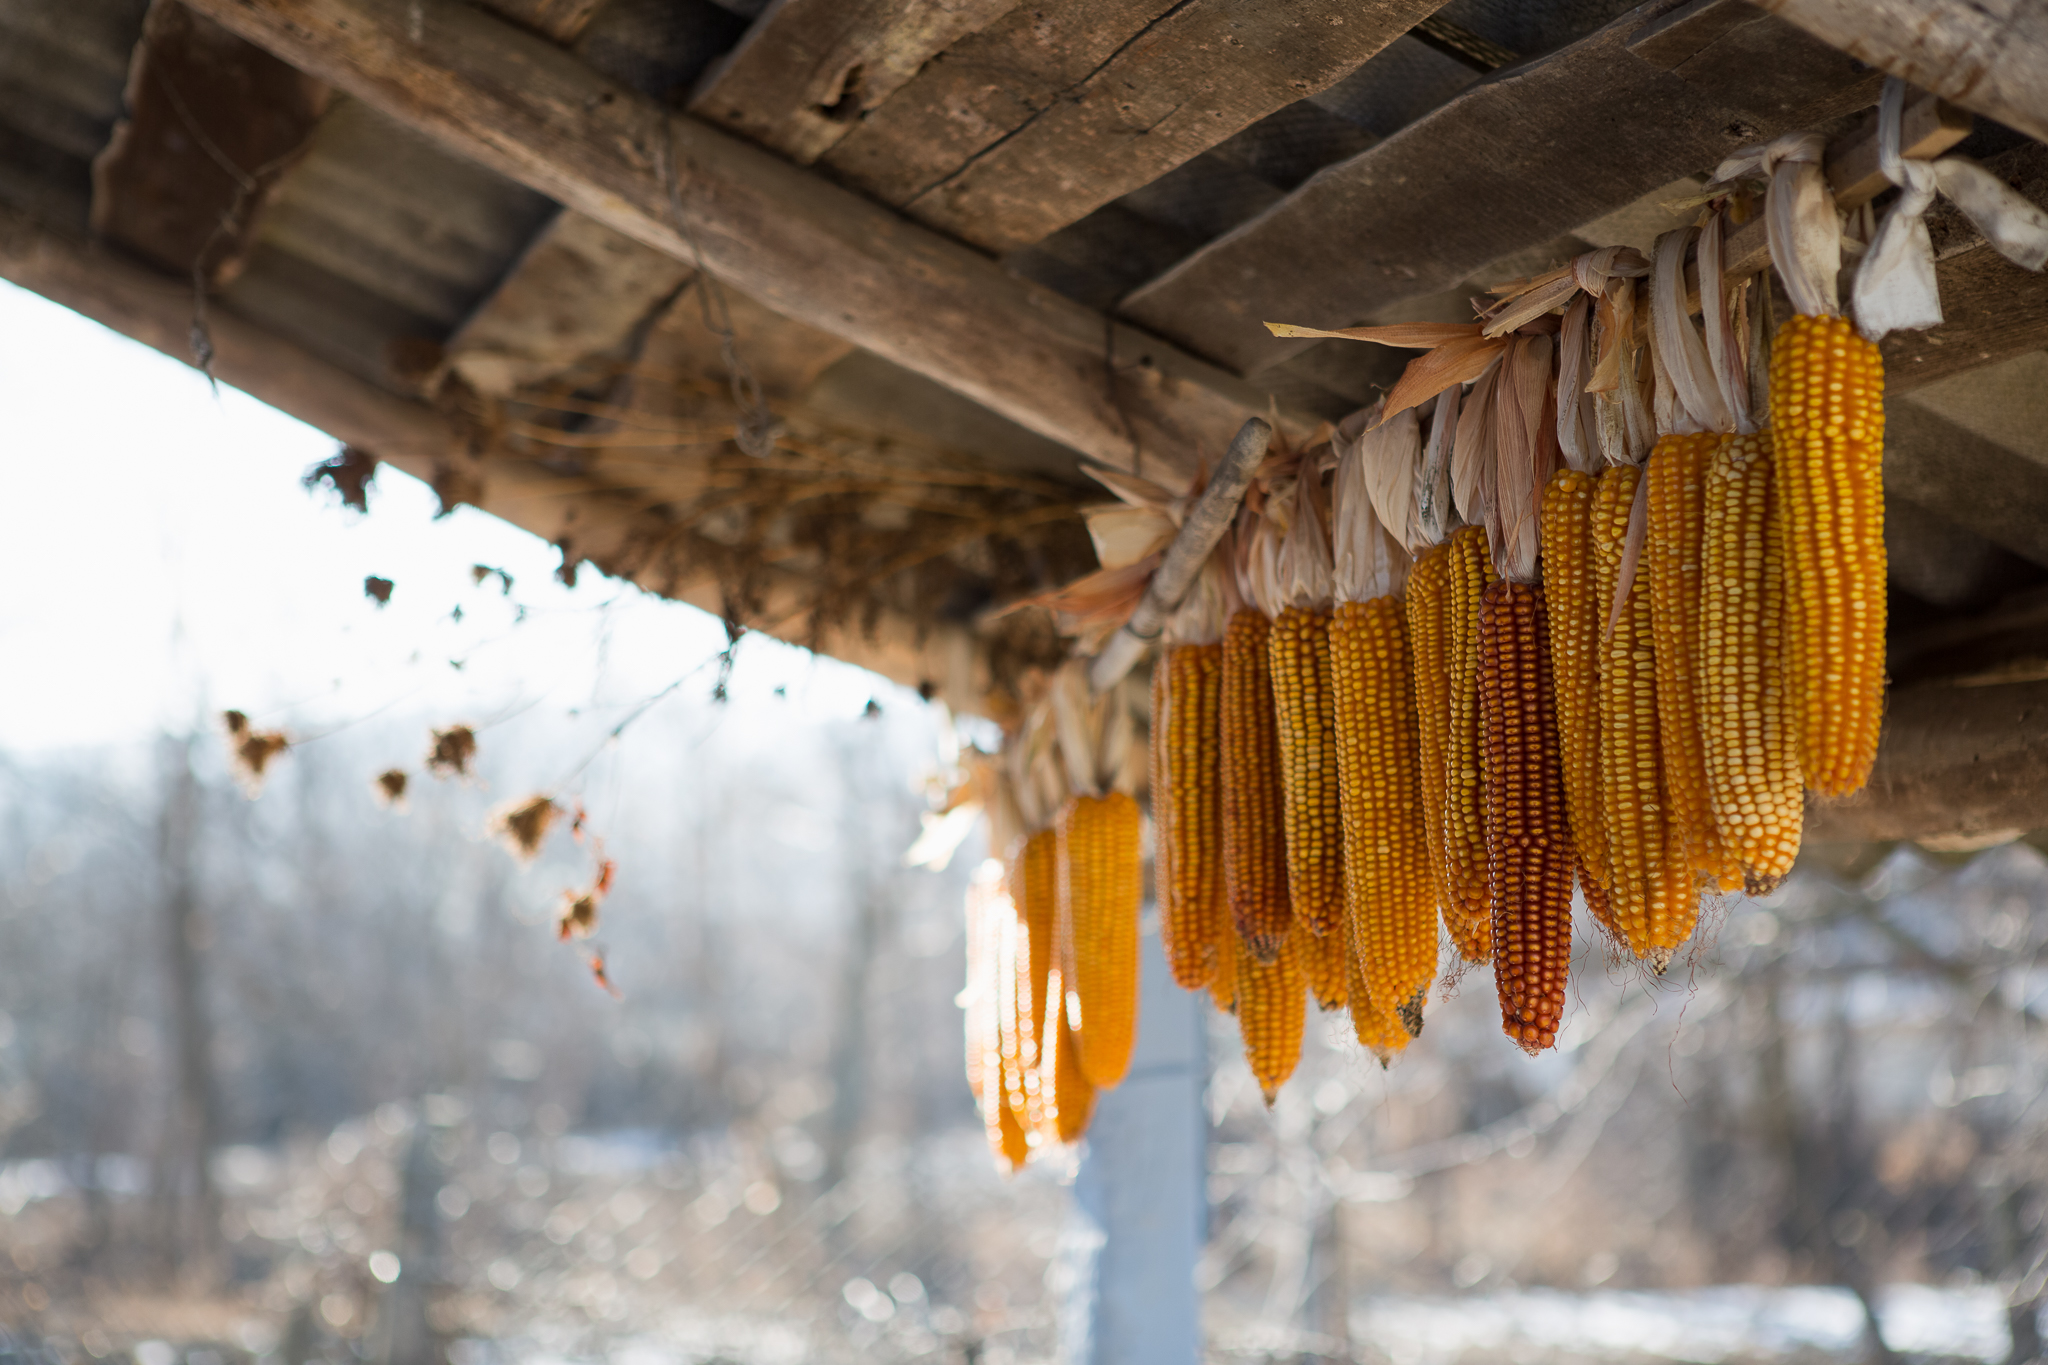 Hanging corn from a roof